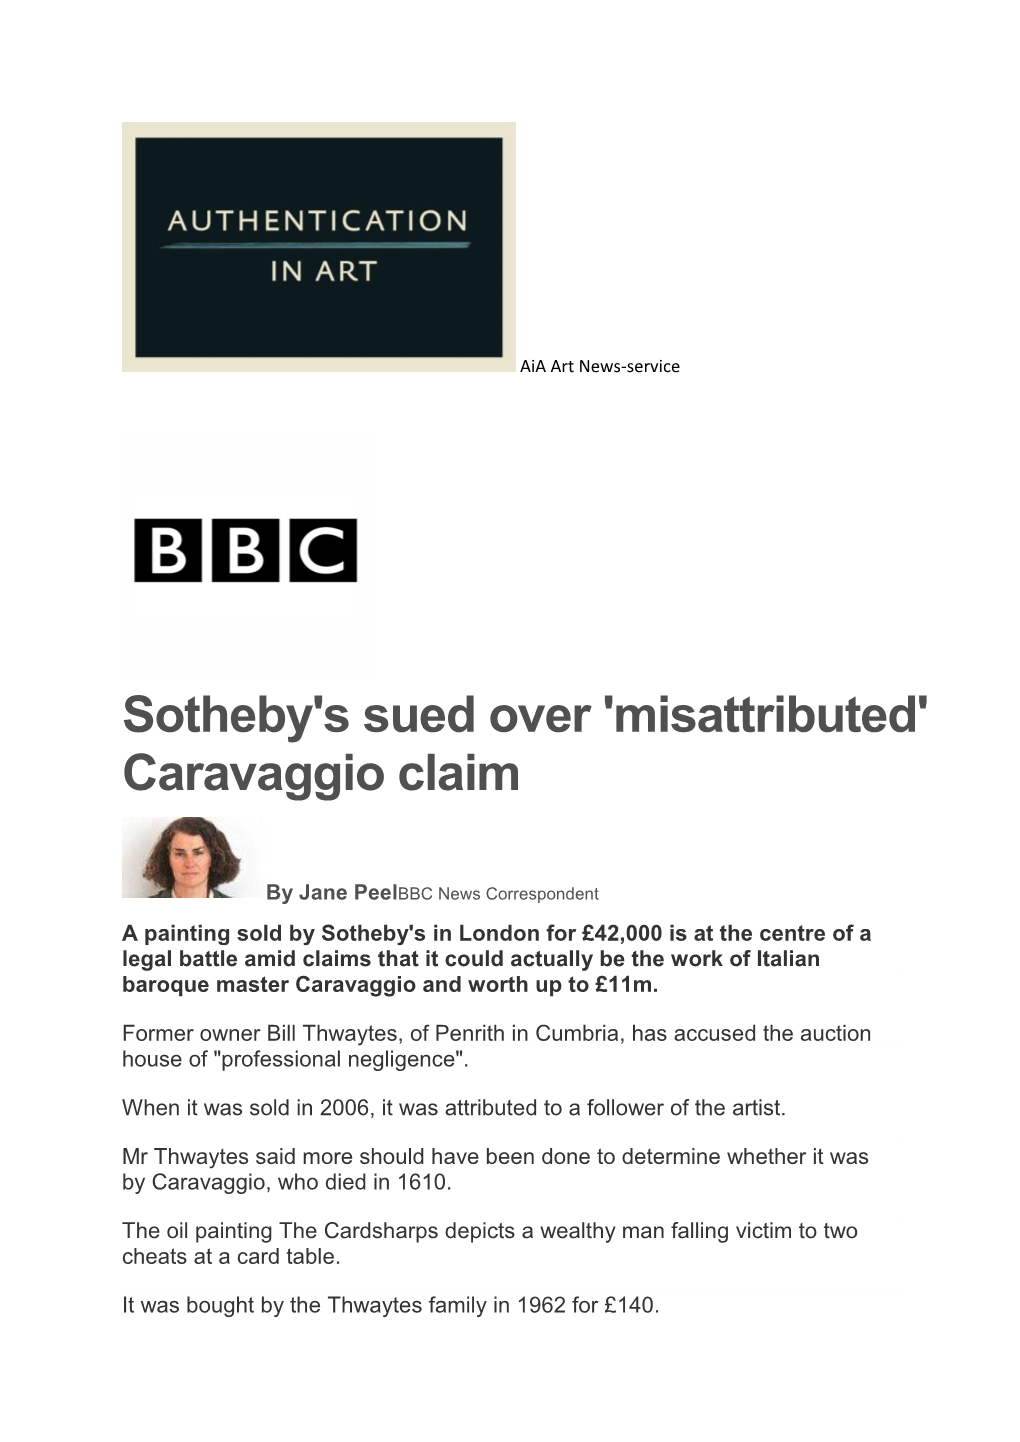 Sotheby's Sued Over 'Misattributed' Caravaggio Claim